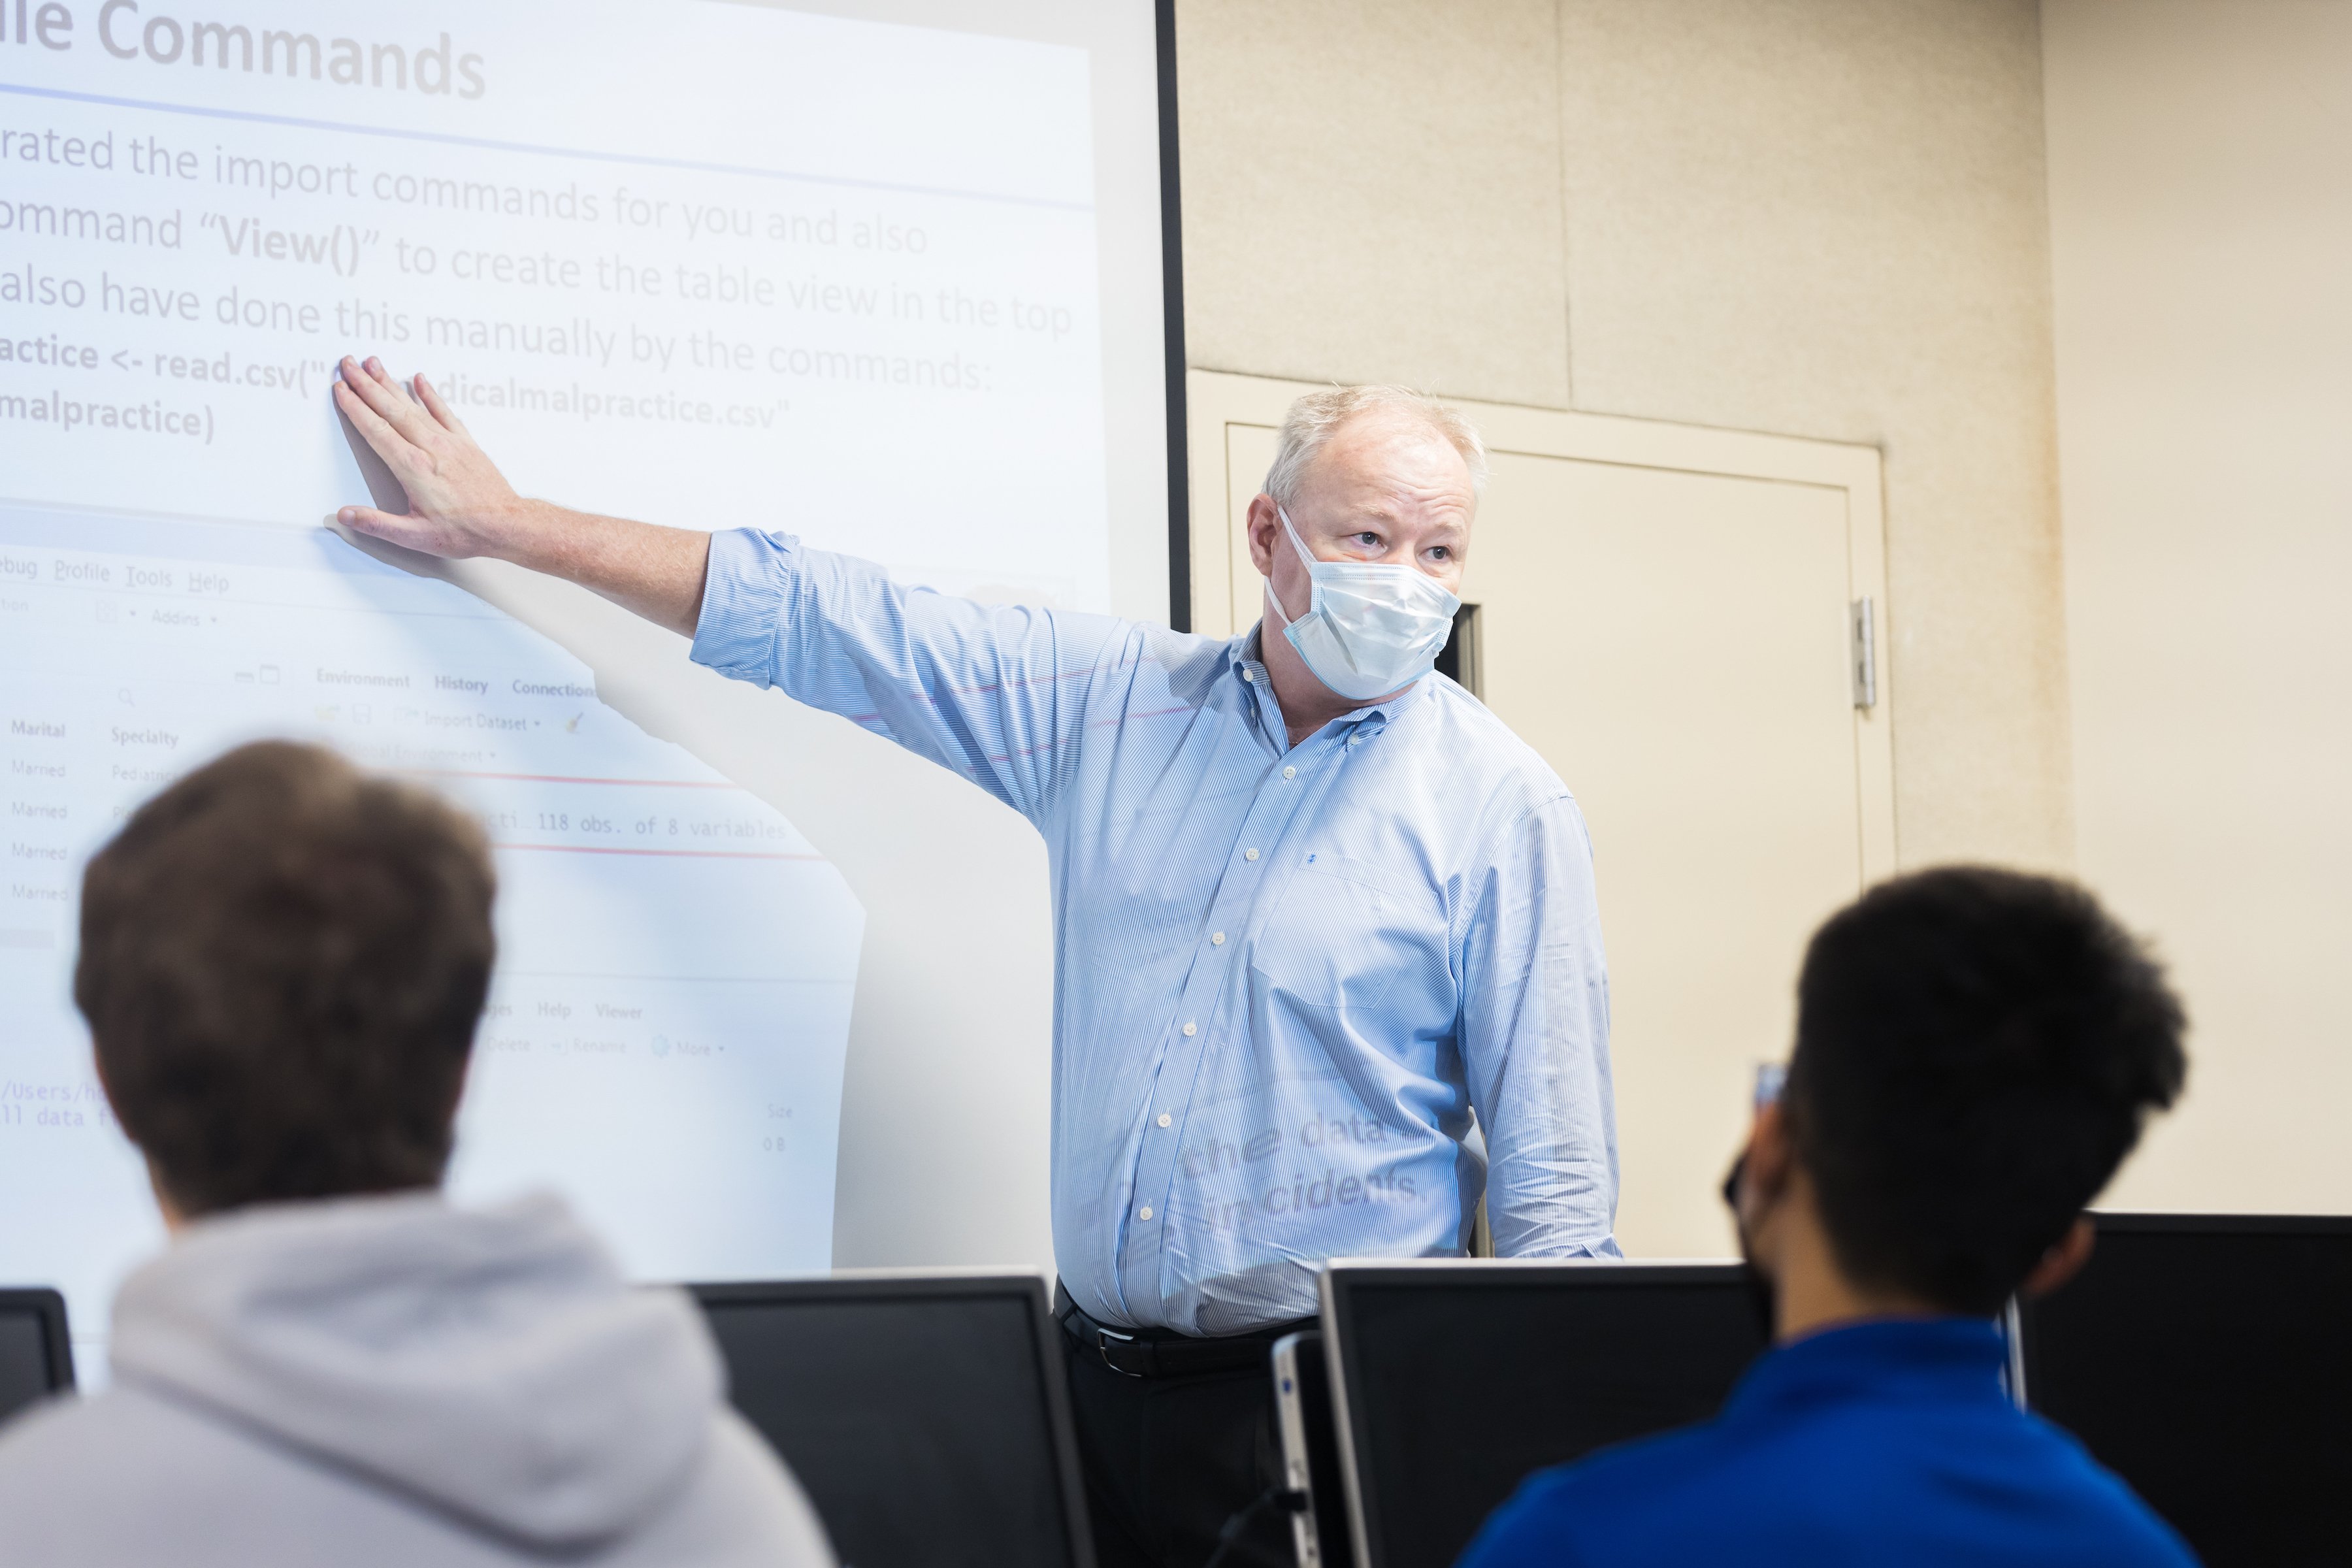 Bjarne Berg, Ph.D., stands in front of a white board while teaching a class indoors and wearing a mask